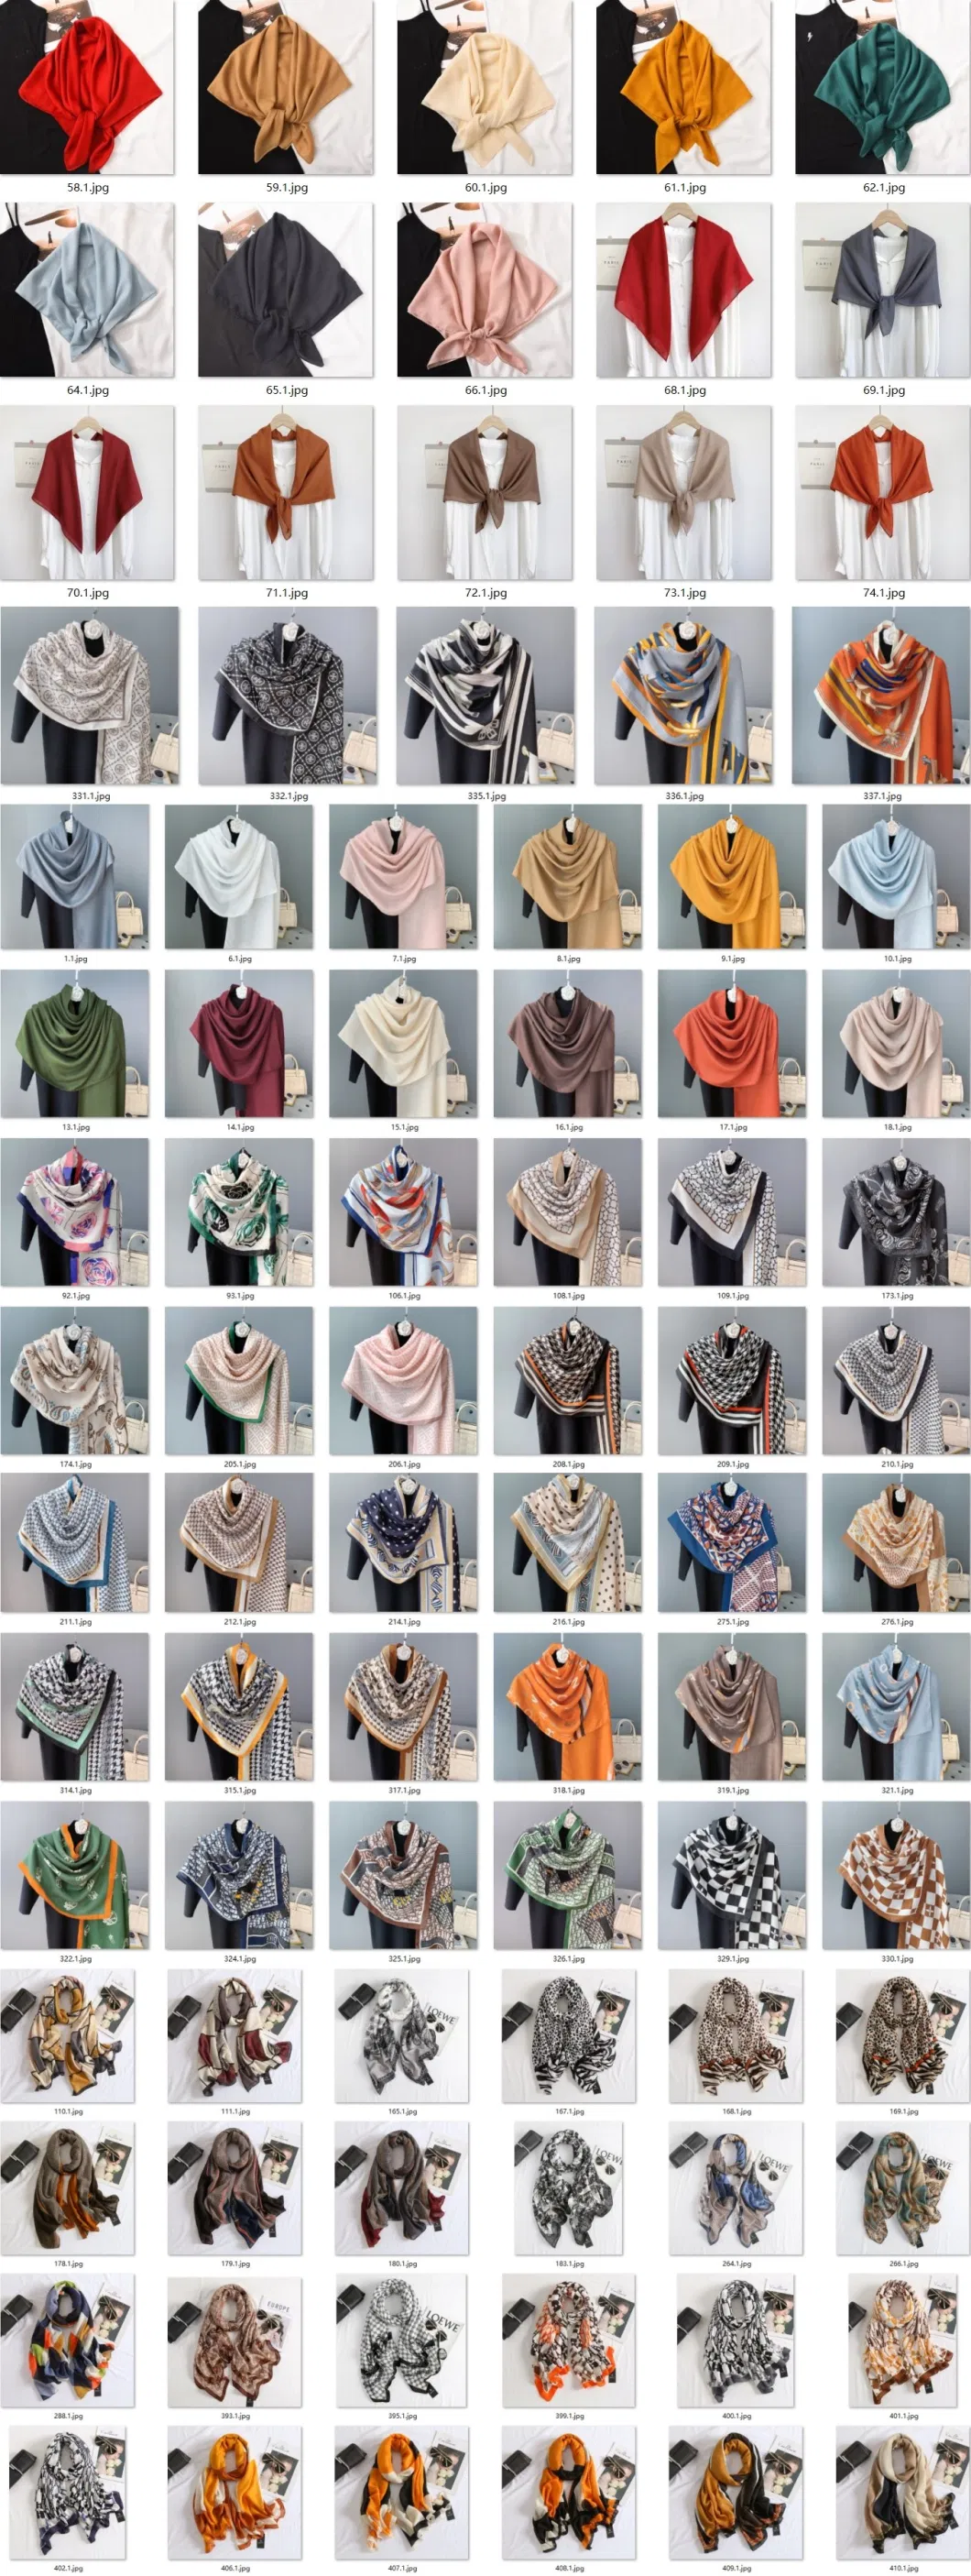 85*180cm Wholesale Fashion Cotton Scarf Shawl for Woman Custom Printed Cotton Hijab Voile Headscarf for Women